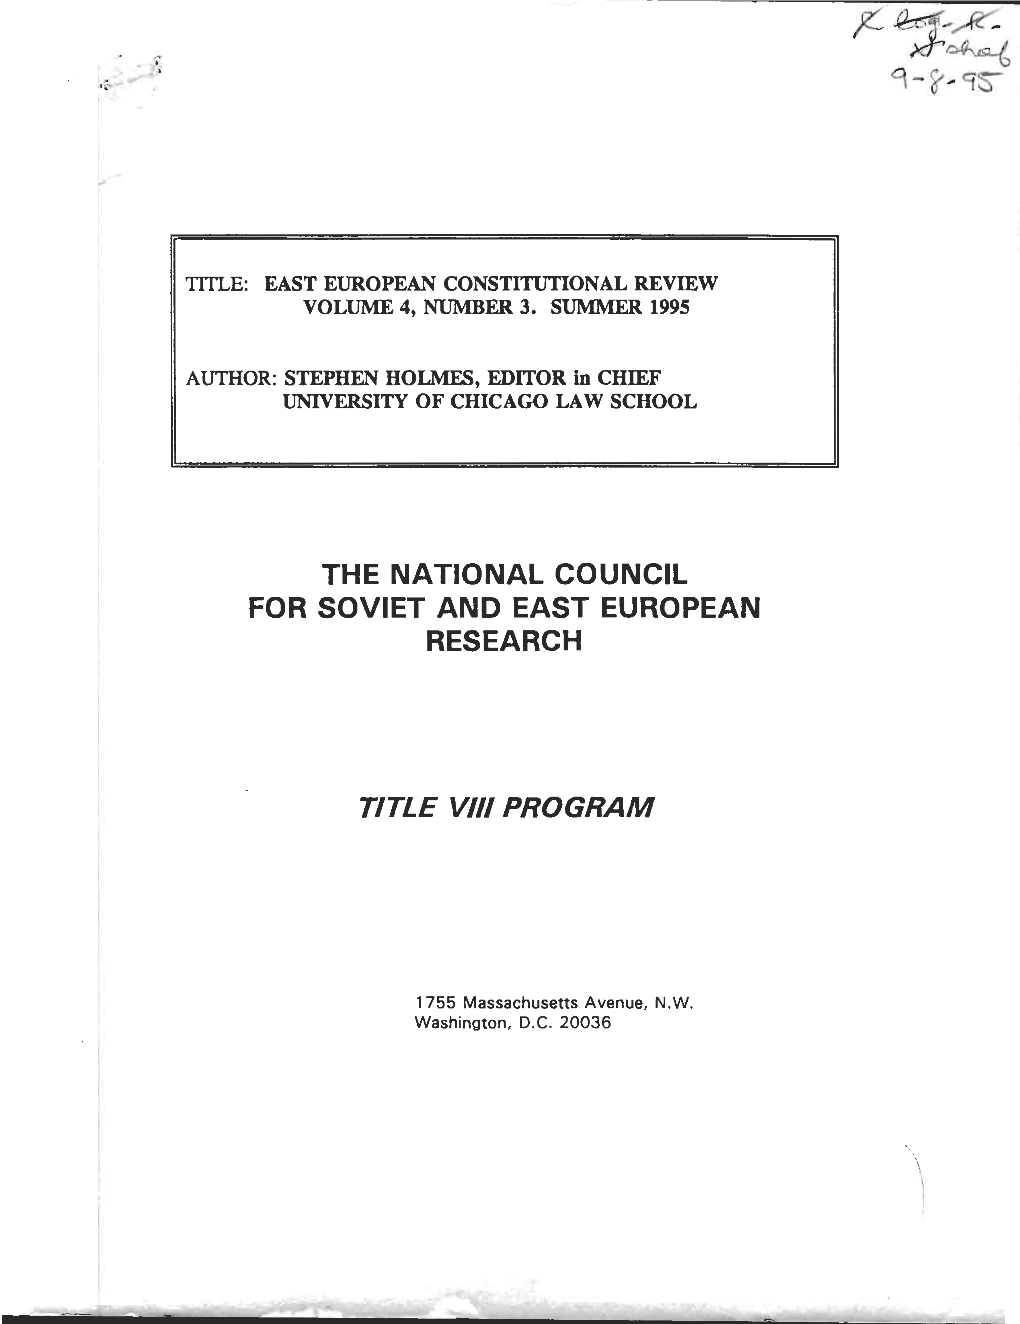 East European Constitutional Review Volume Number 3. Summer 1995